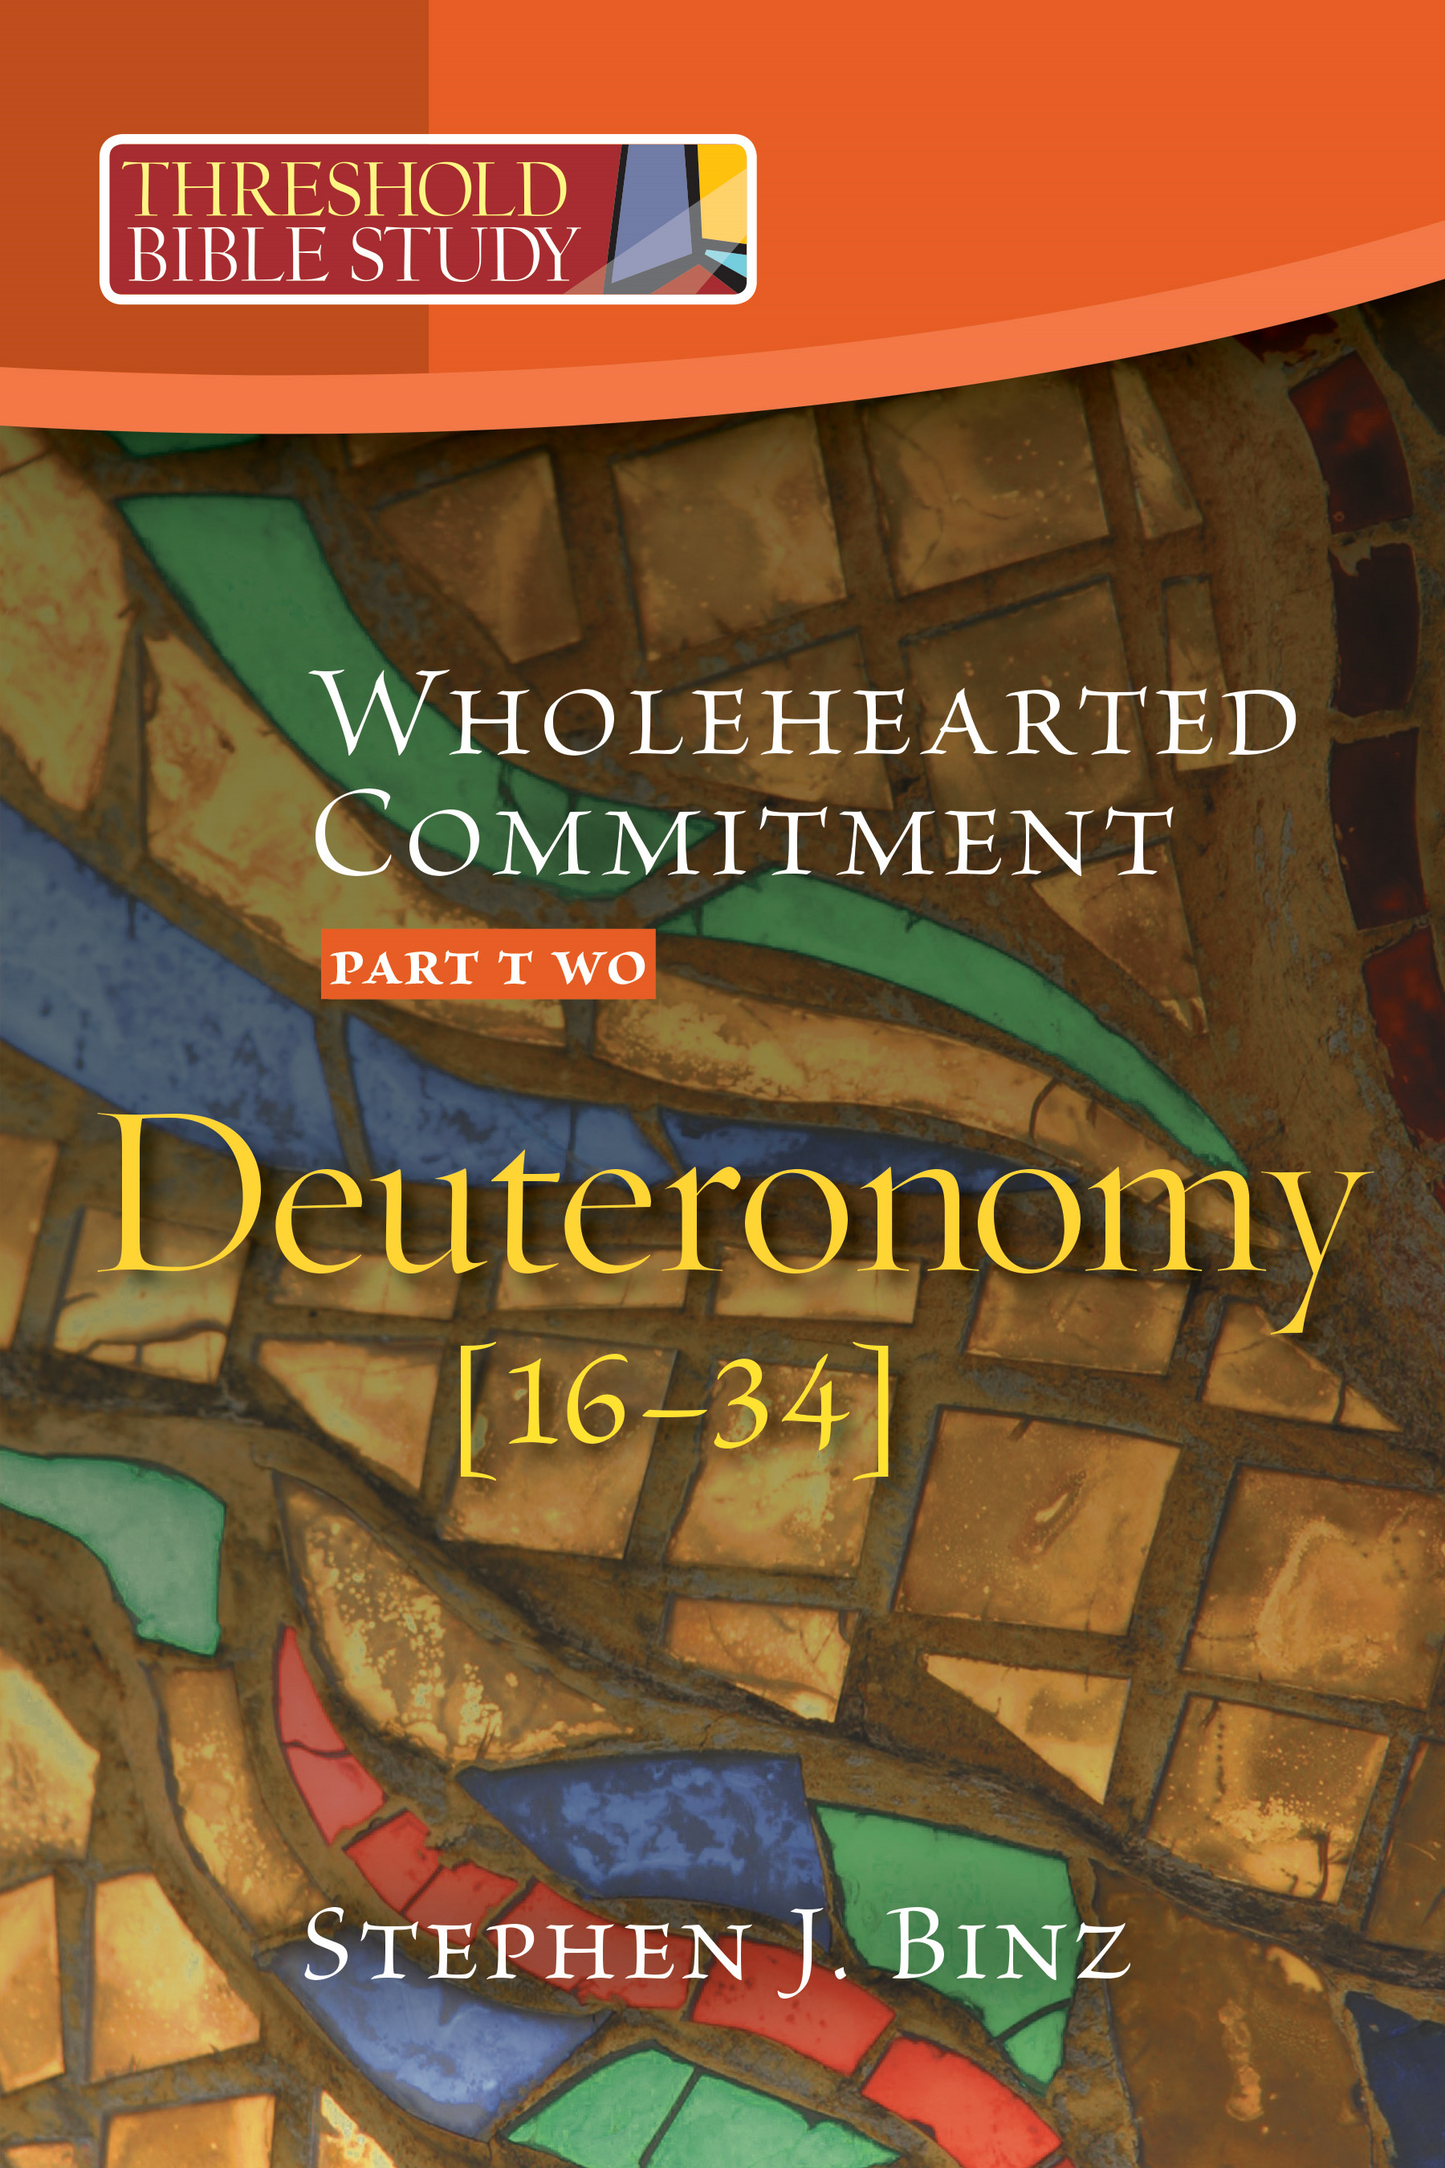 Threshold Bible Study Wholehearted Commitment Part 2 Deuteronomy